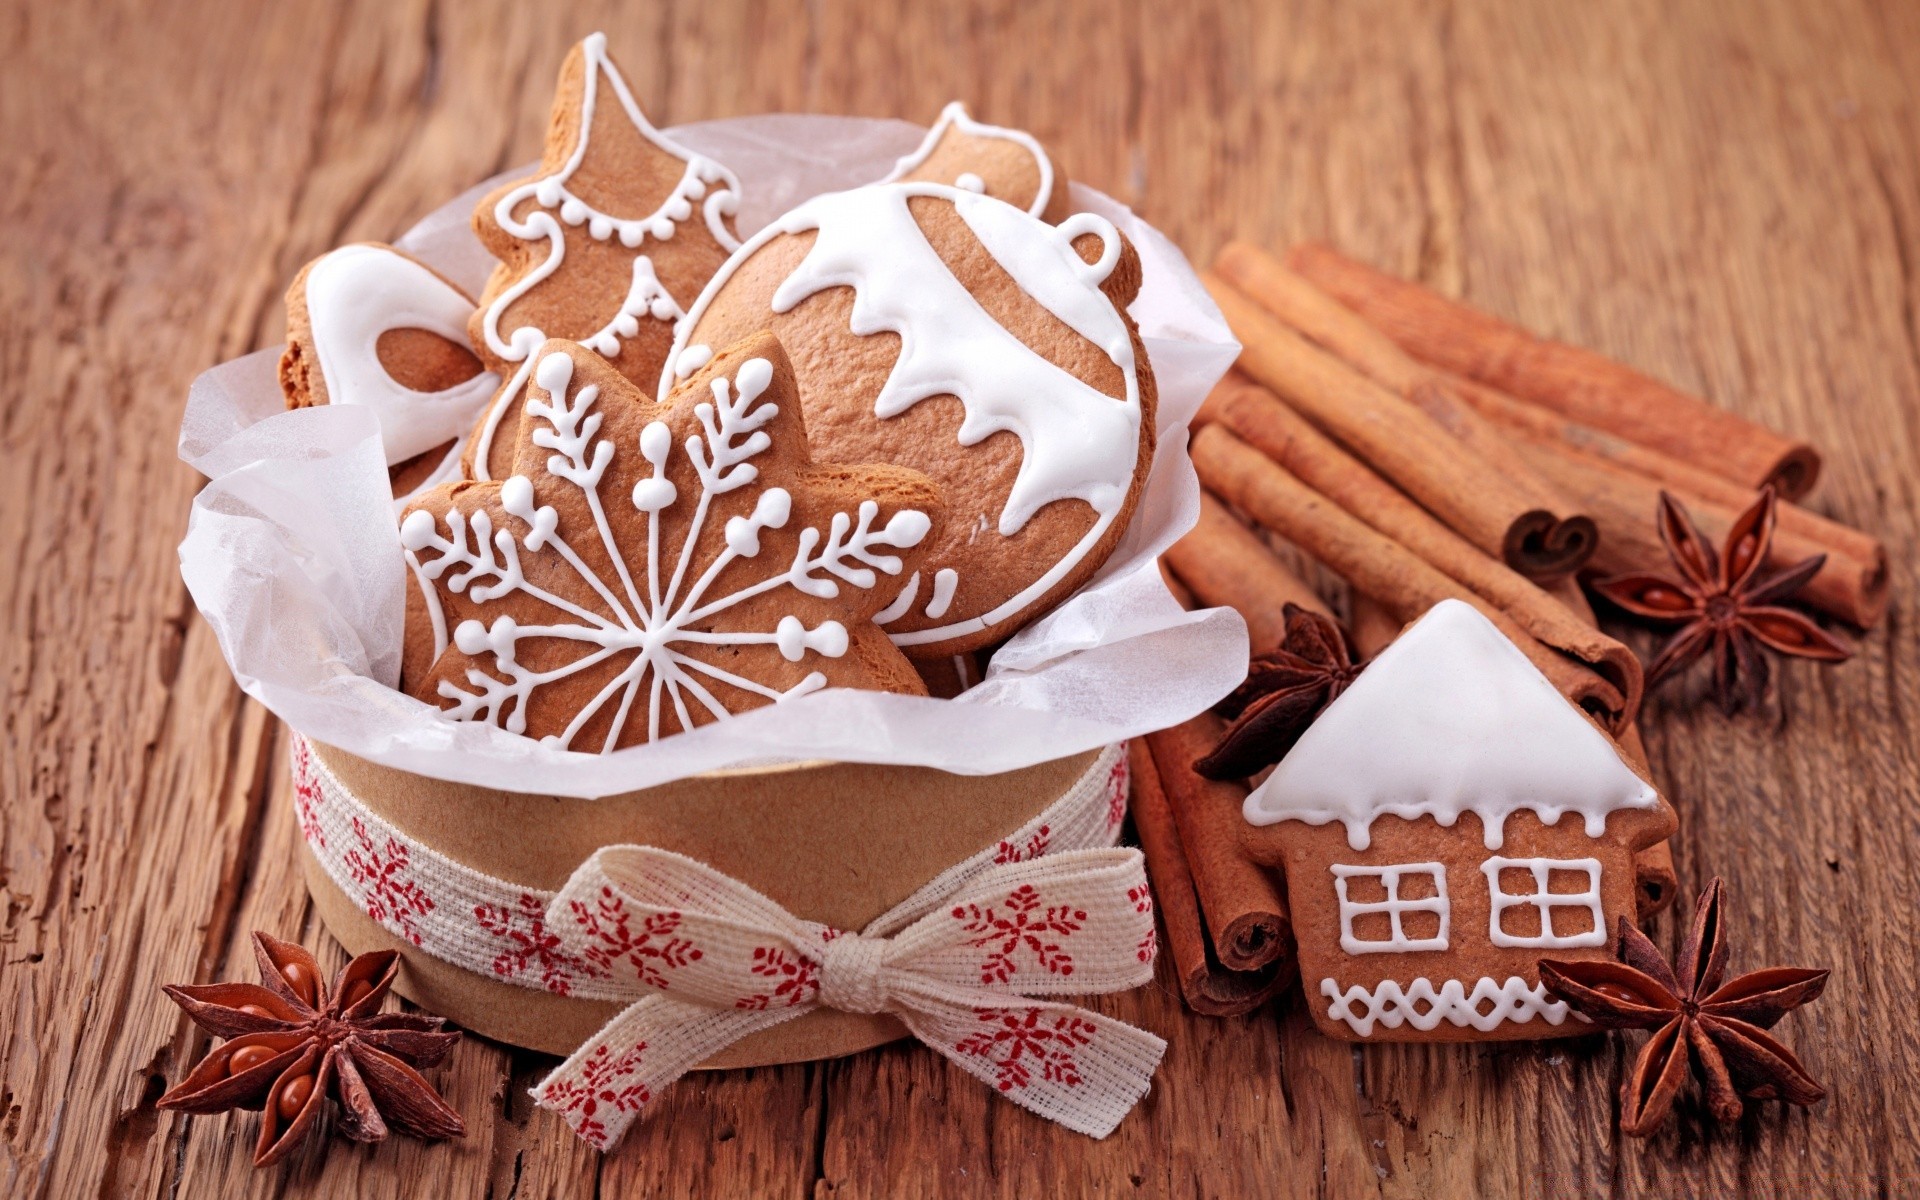 christmas cinnamon wooden gingerbread wood traditional cookie homemade rustic food decoration anise sugar sweet spice baking advent chocolate desktop